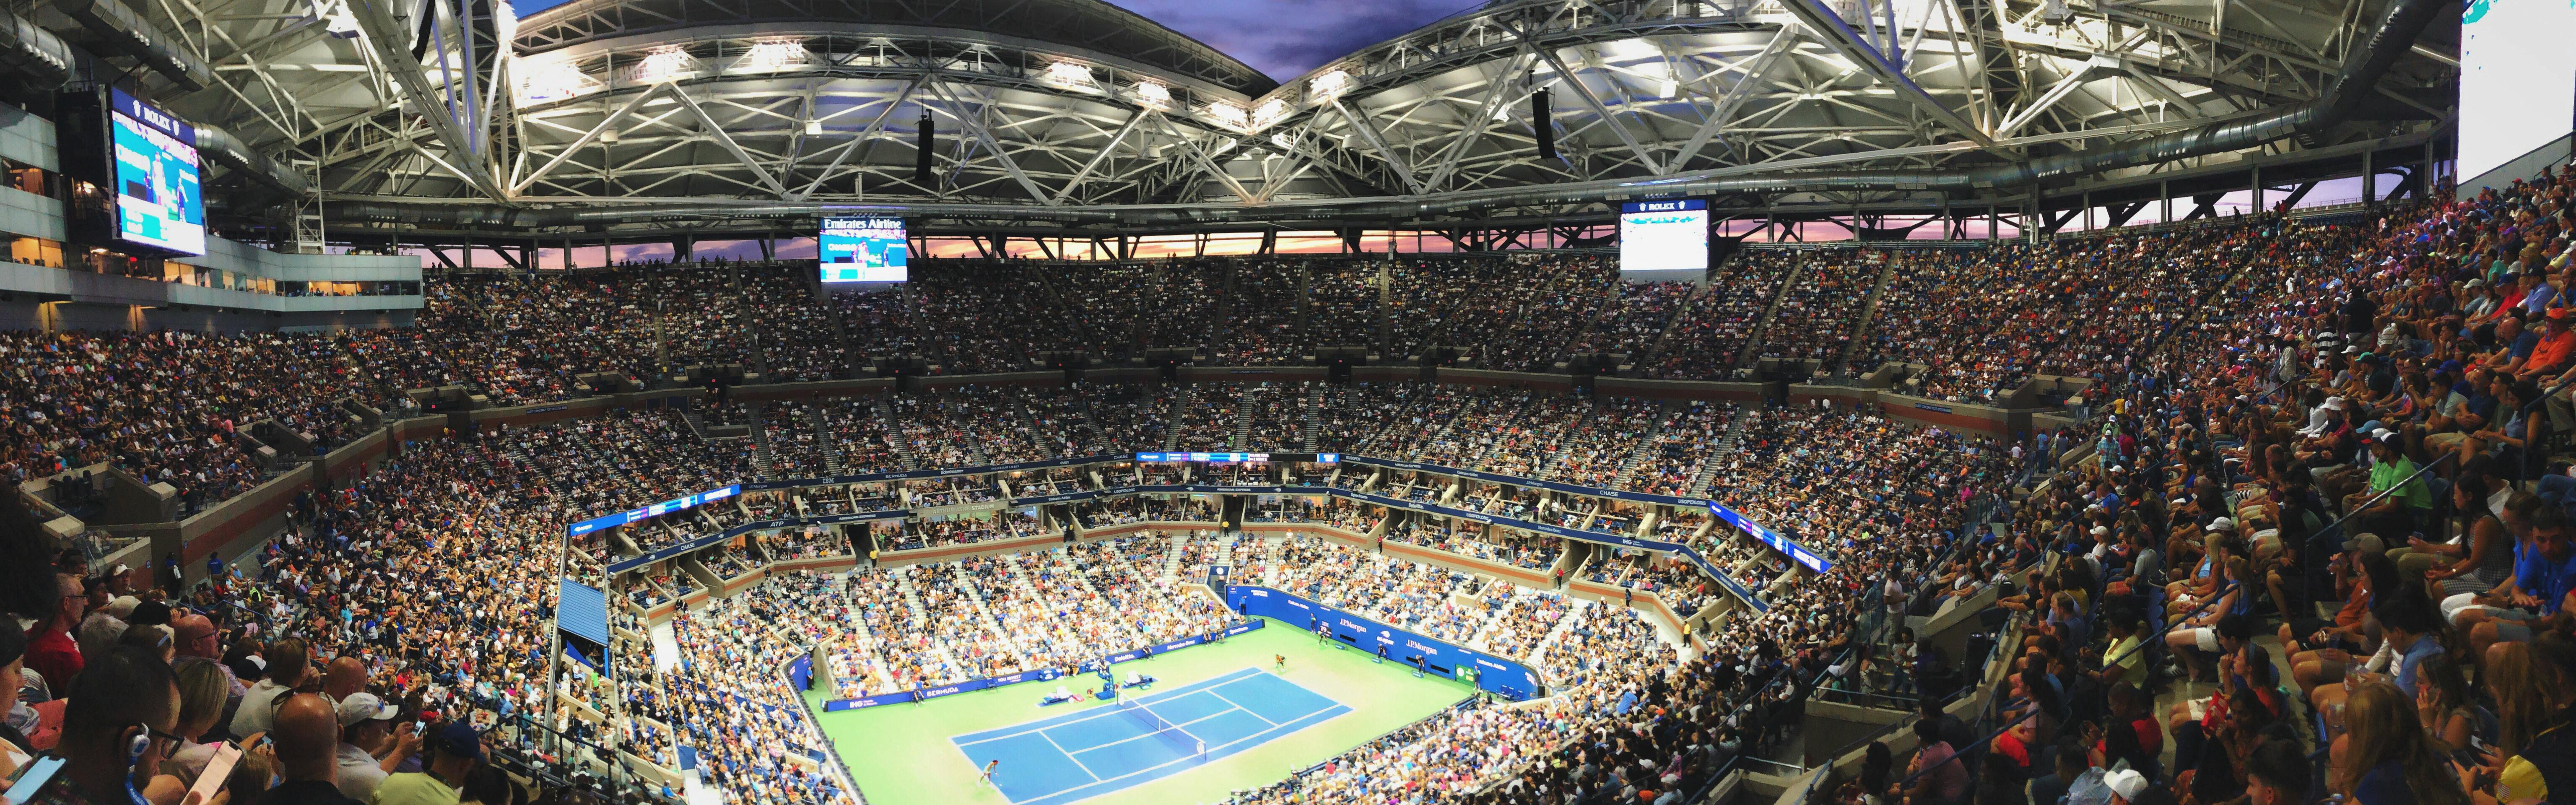 Two people playing on the Arthur Ashe stadium in the U.S. Open. The crowds are packed.